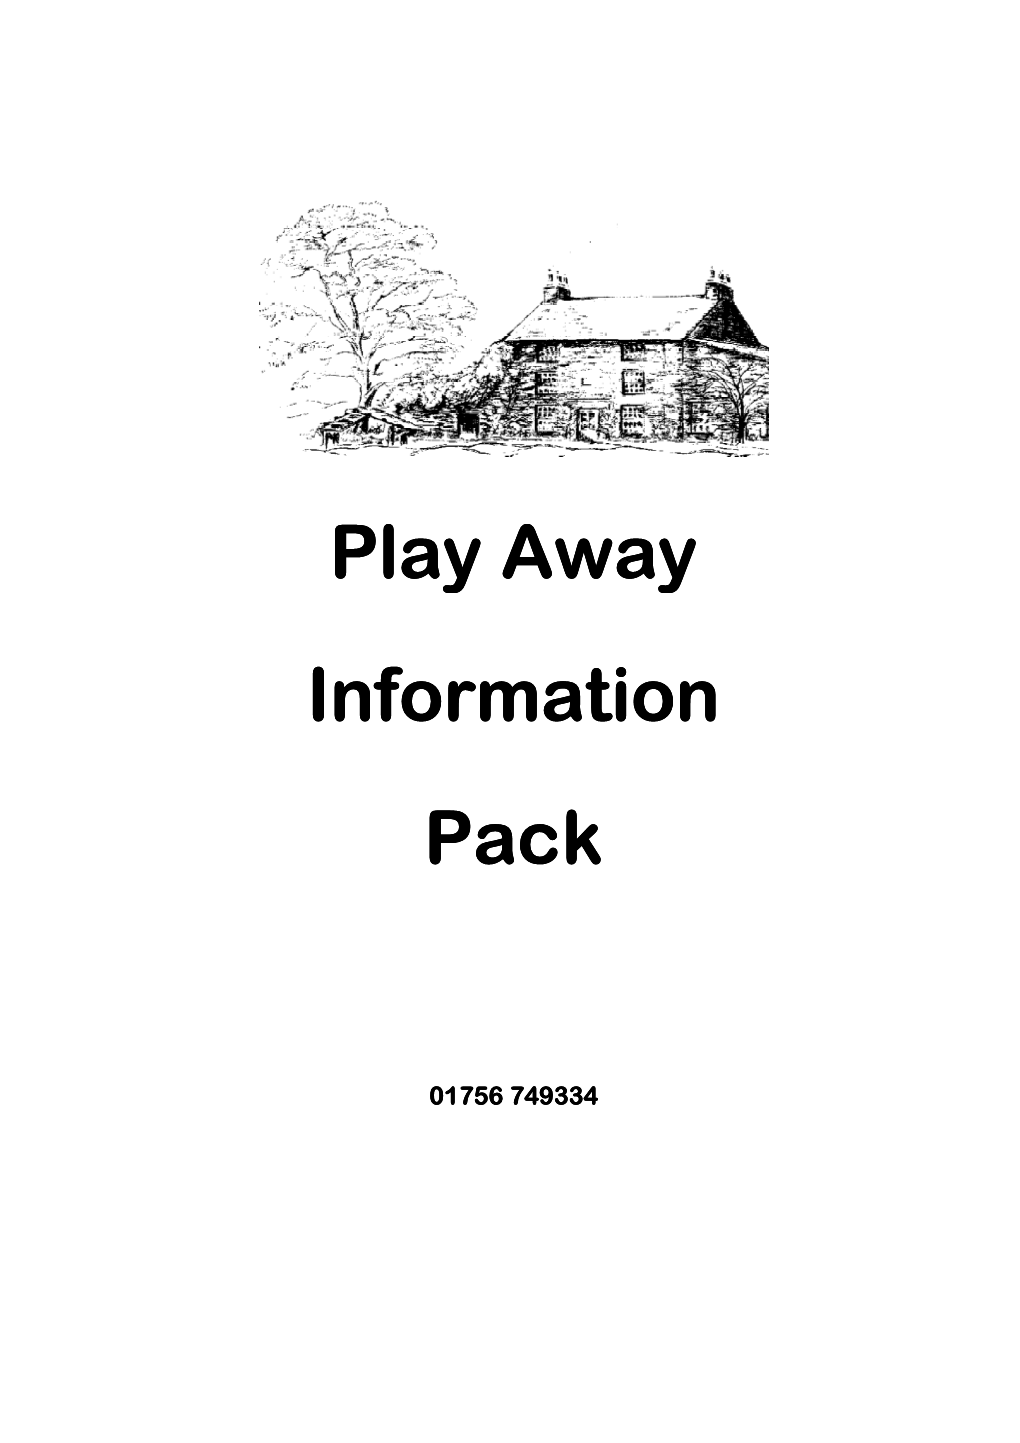 Play Away Play Away Information Information Pack